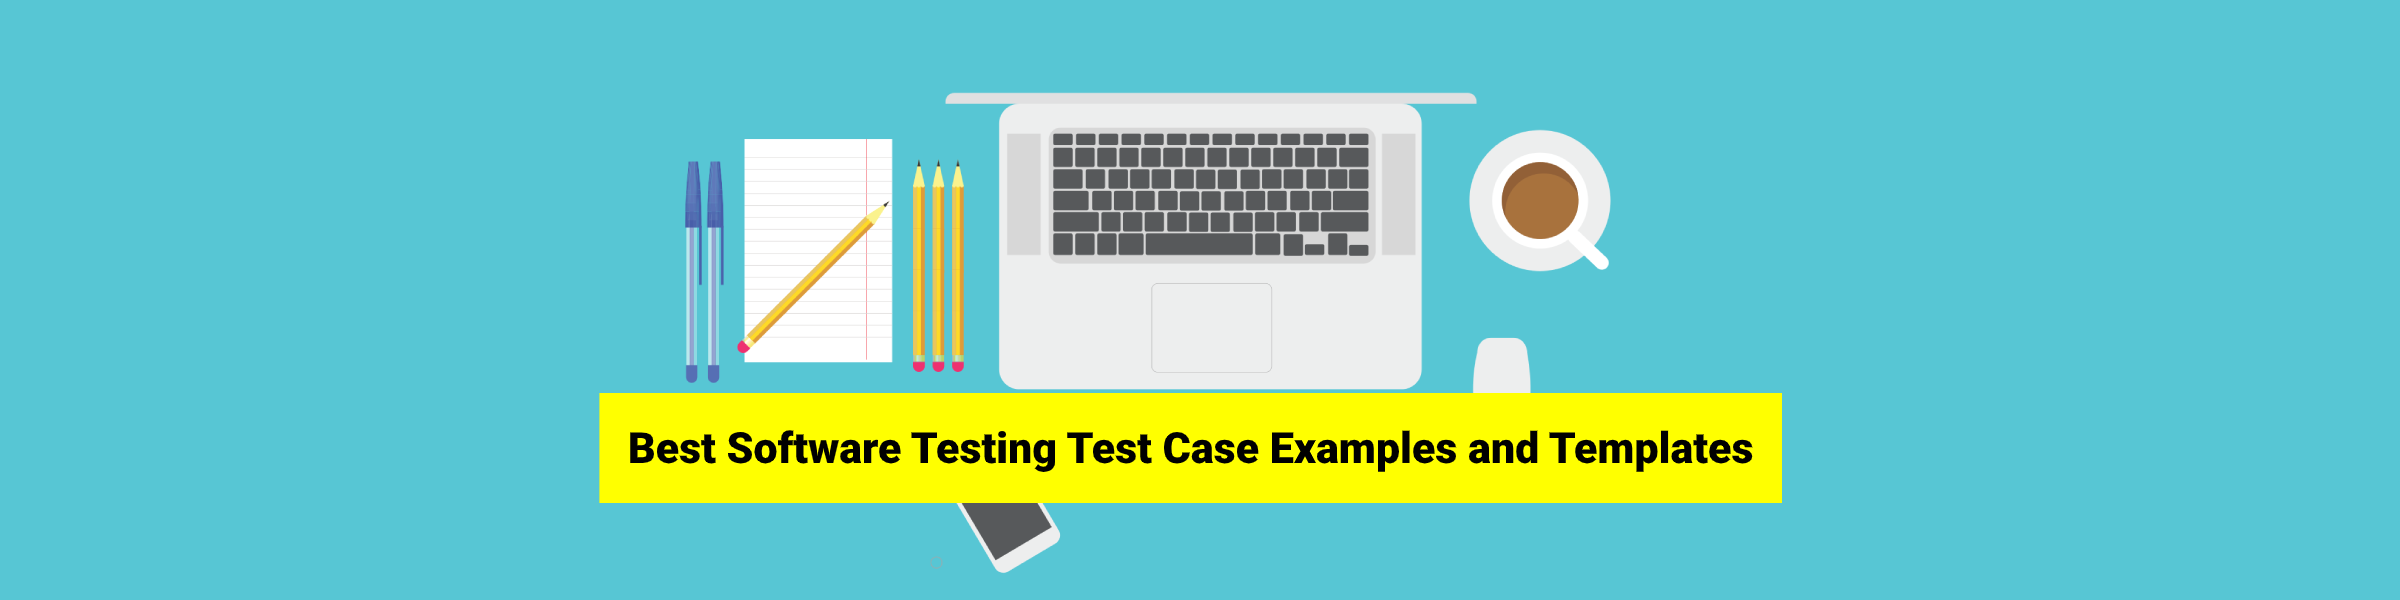 Best Software Testing Test Case Templates and Examples